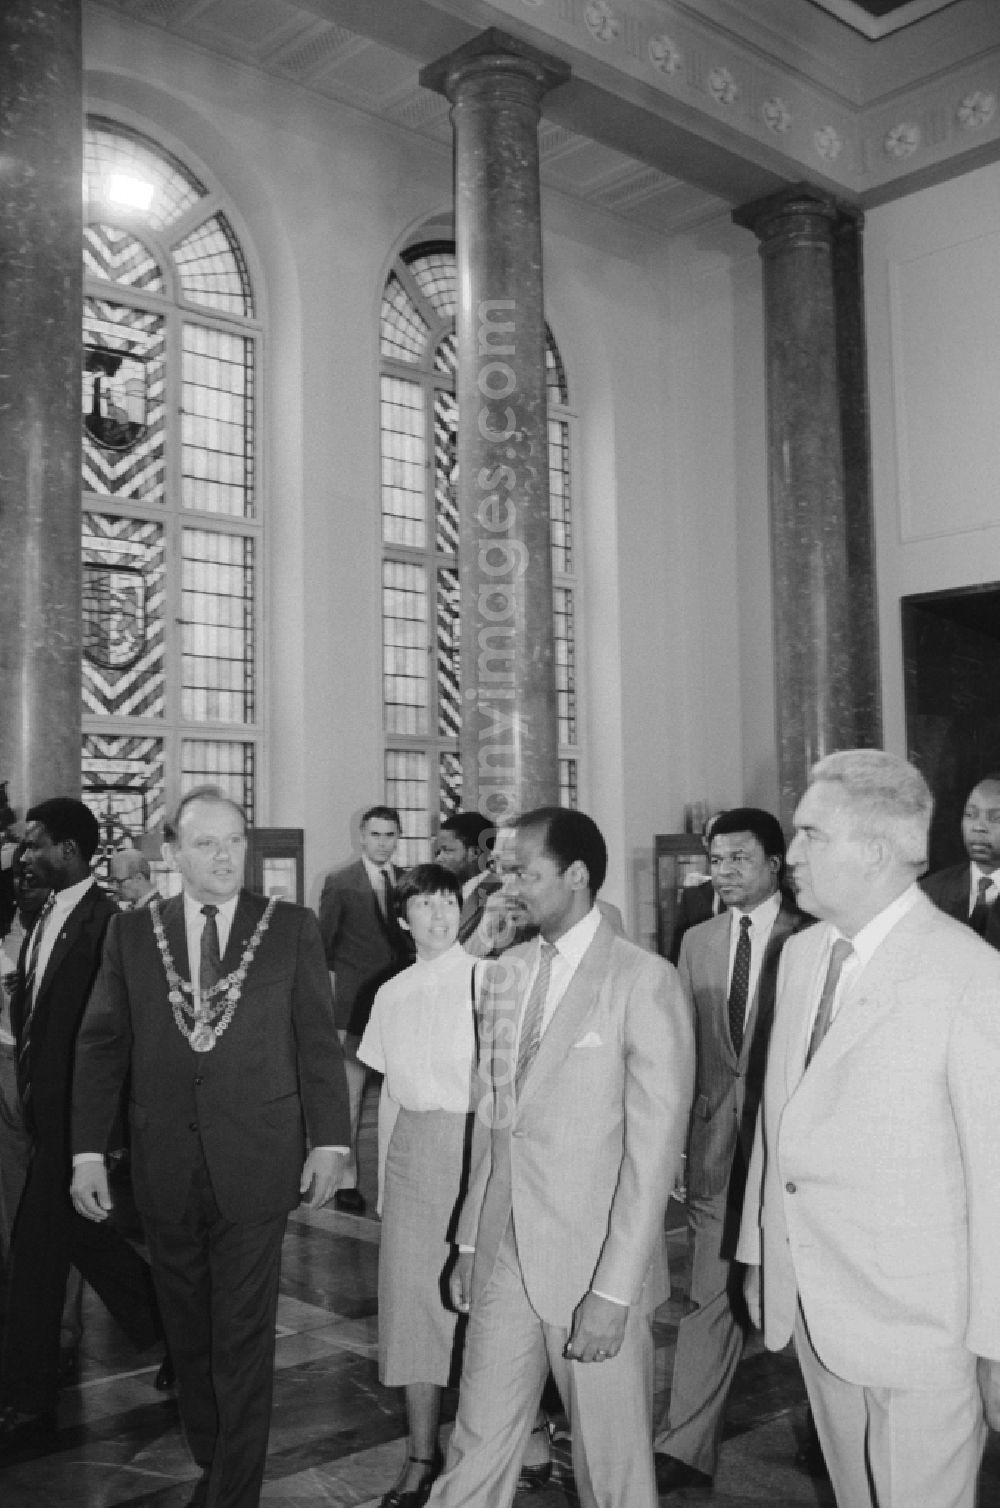 GDR photo archive: Berlin - The mayor of East Berlin Erhard Krack leads the President of the People's Republic of Mozambique, Joaquim Chissano and his delegation by the Red Town Hall in Berlin in the state of Berlin in the area of the former GDR, German Democratic Republic